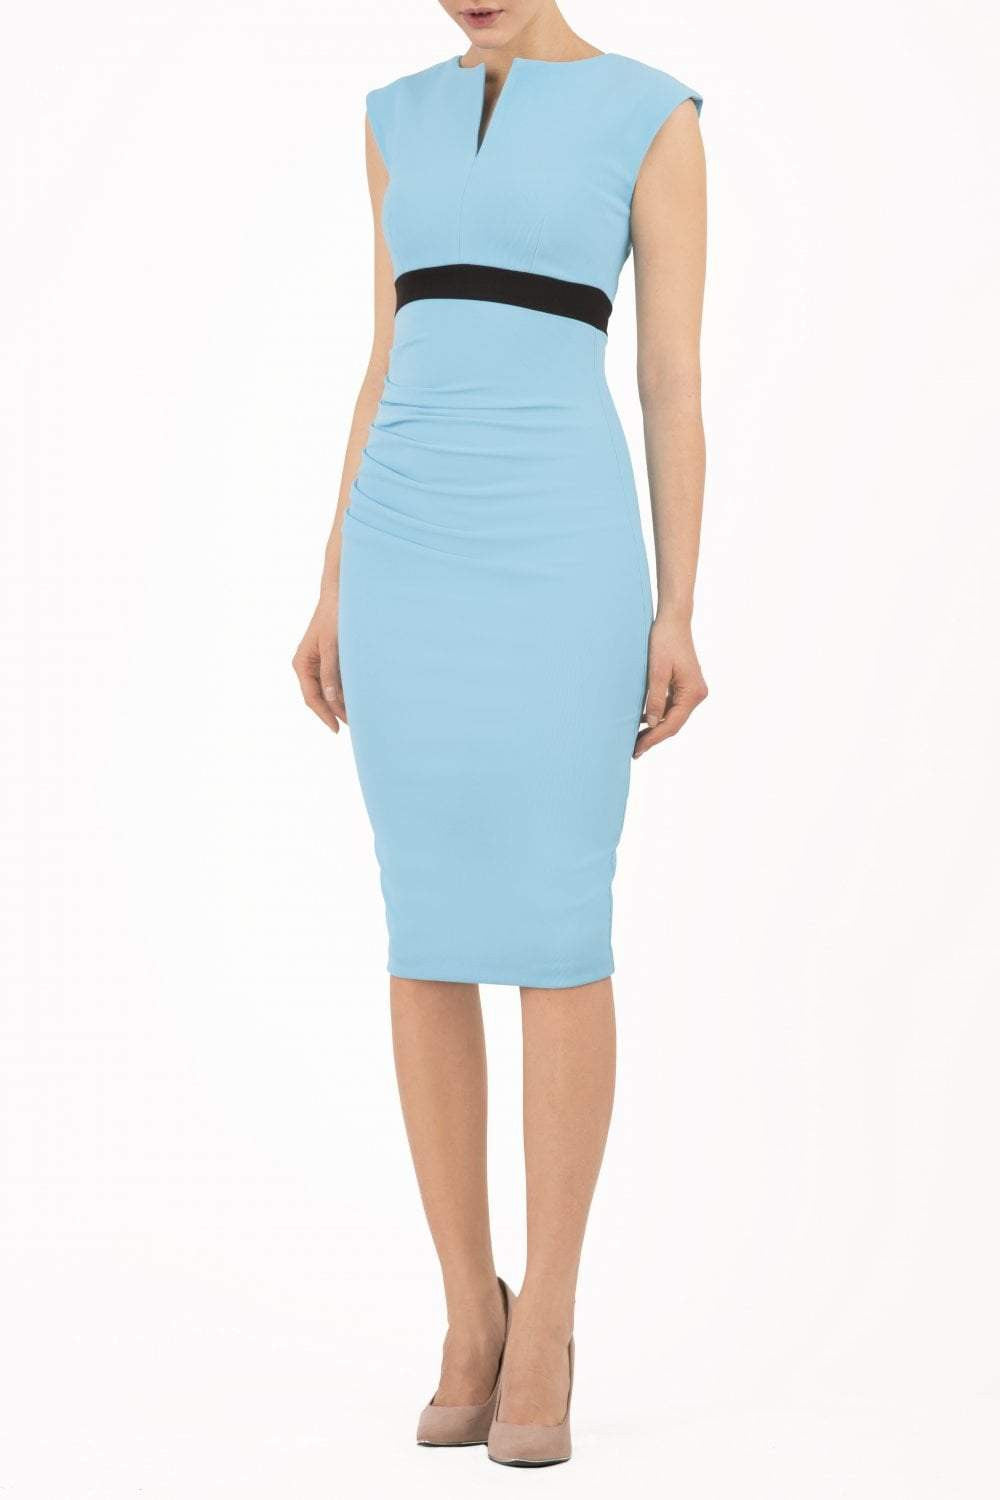 brunette model wearing diva catwalk nadia sleeveless pencil dress in sky blue colour with a contrasting black band and exposed zip at the back with a rounded neckline with a slit  in the middle front